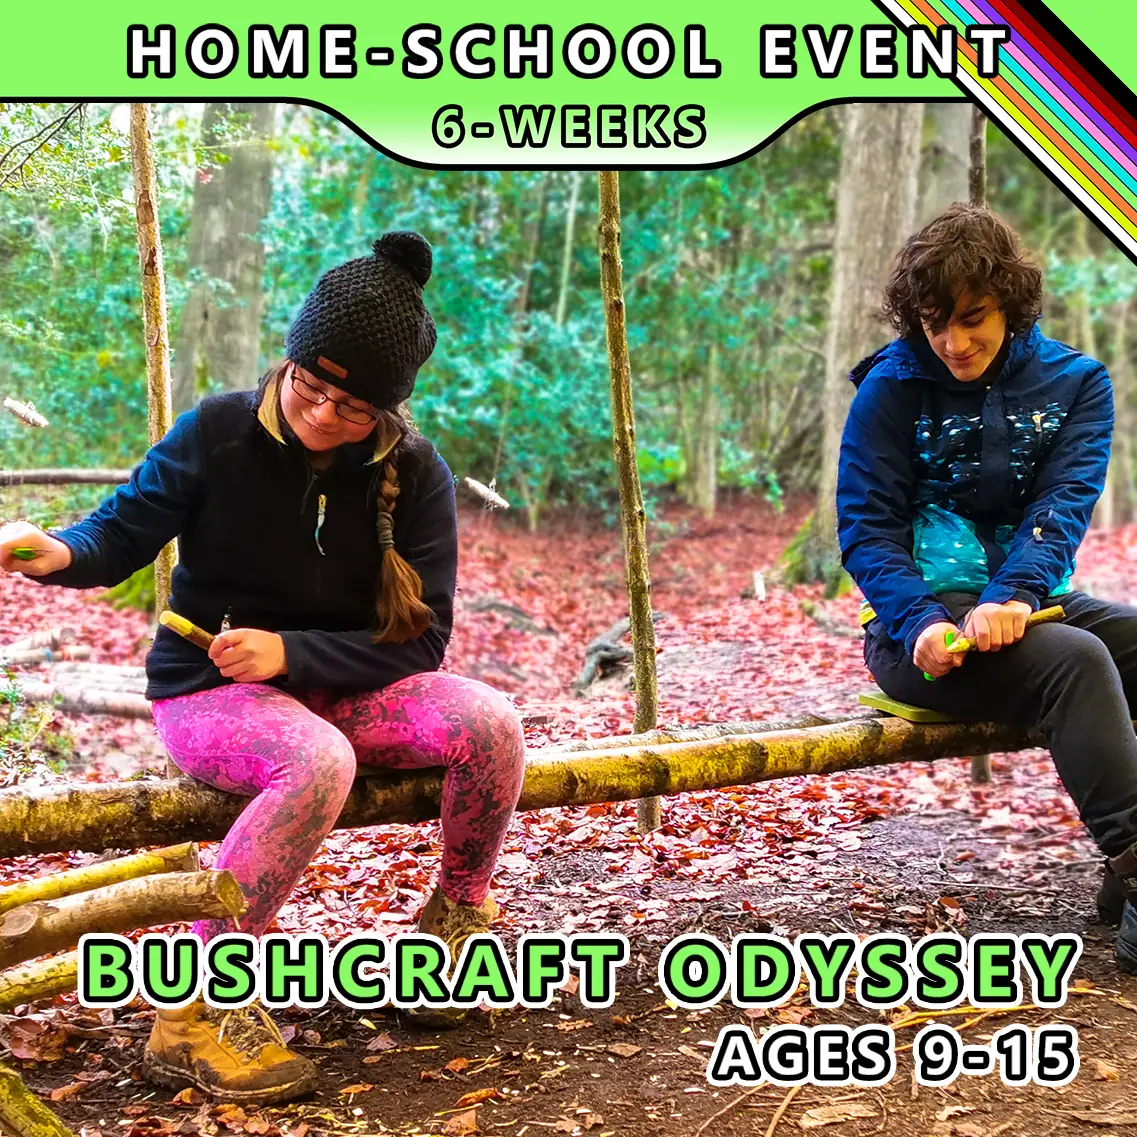 Bushcraft odyssey course for home school children at TRIBE with honours